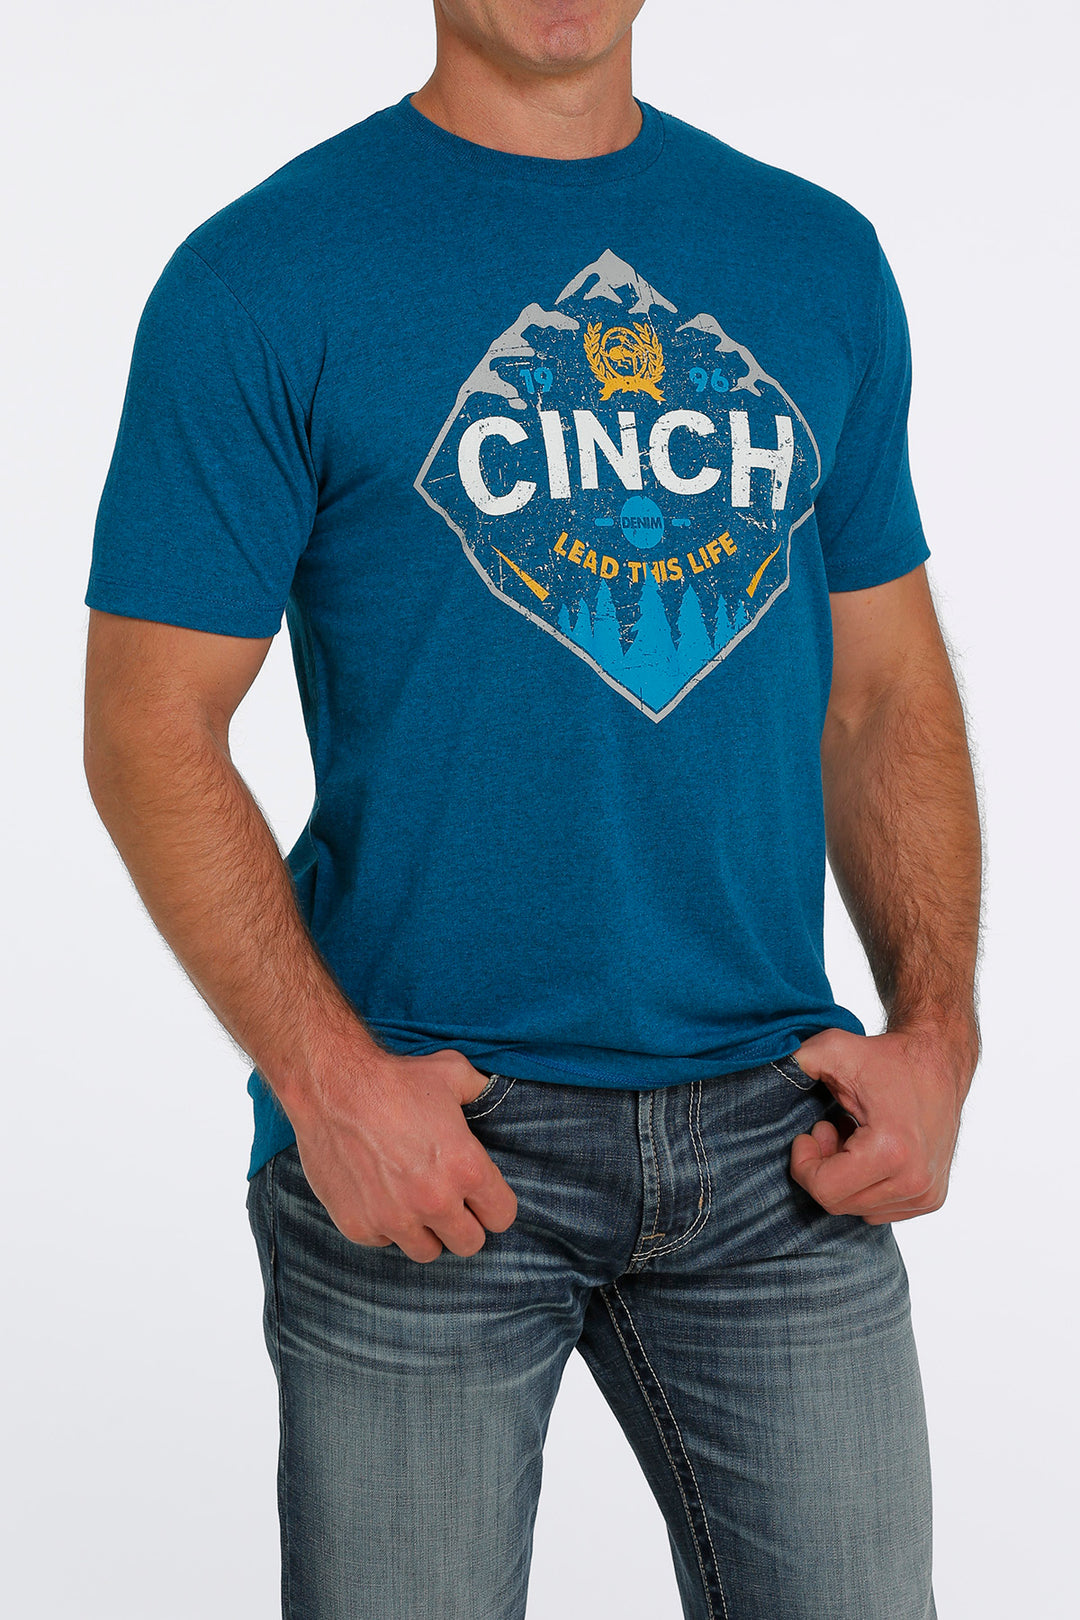 Cinch Men's Lead This Life Graphic Tee